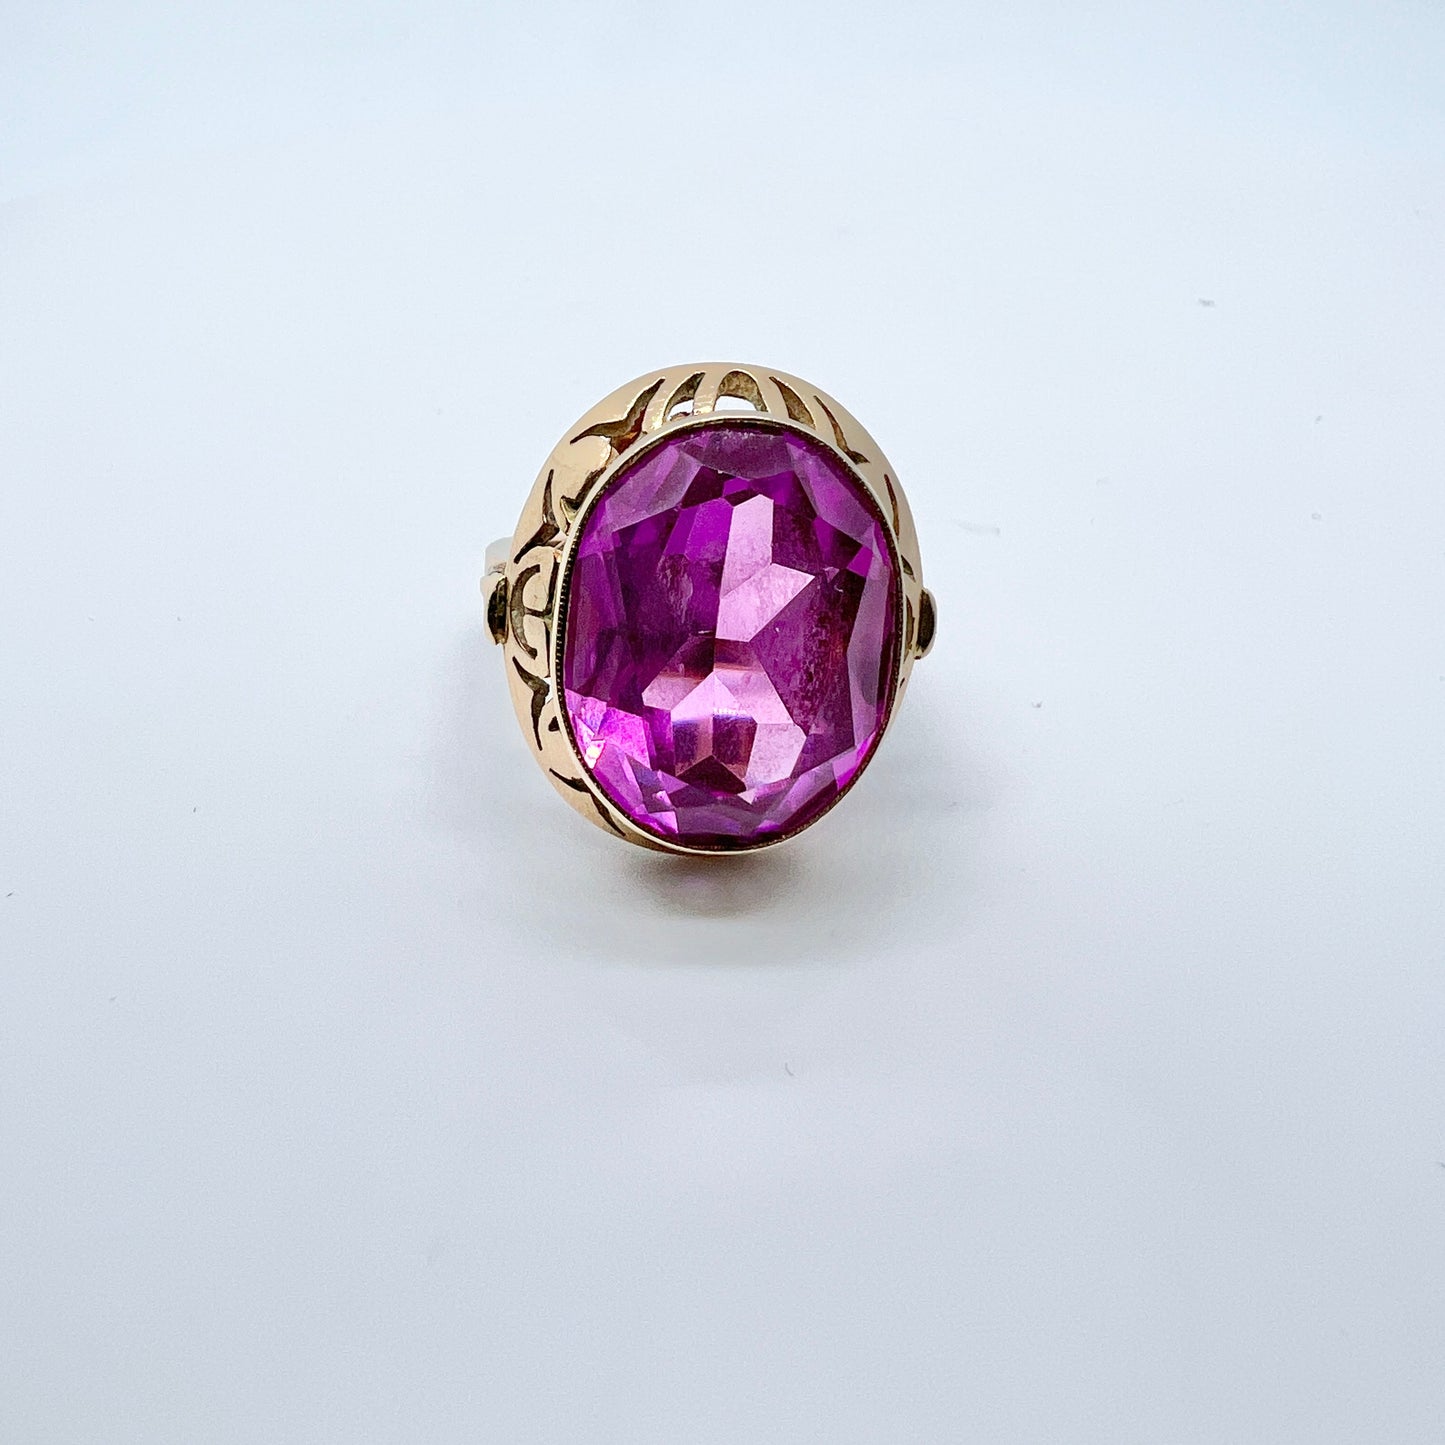 Warsaw, Poland. Vintage 1960-70s. Bold 14k Gold Pink Synthetic Sapphire Ring.